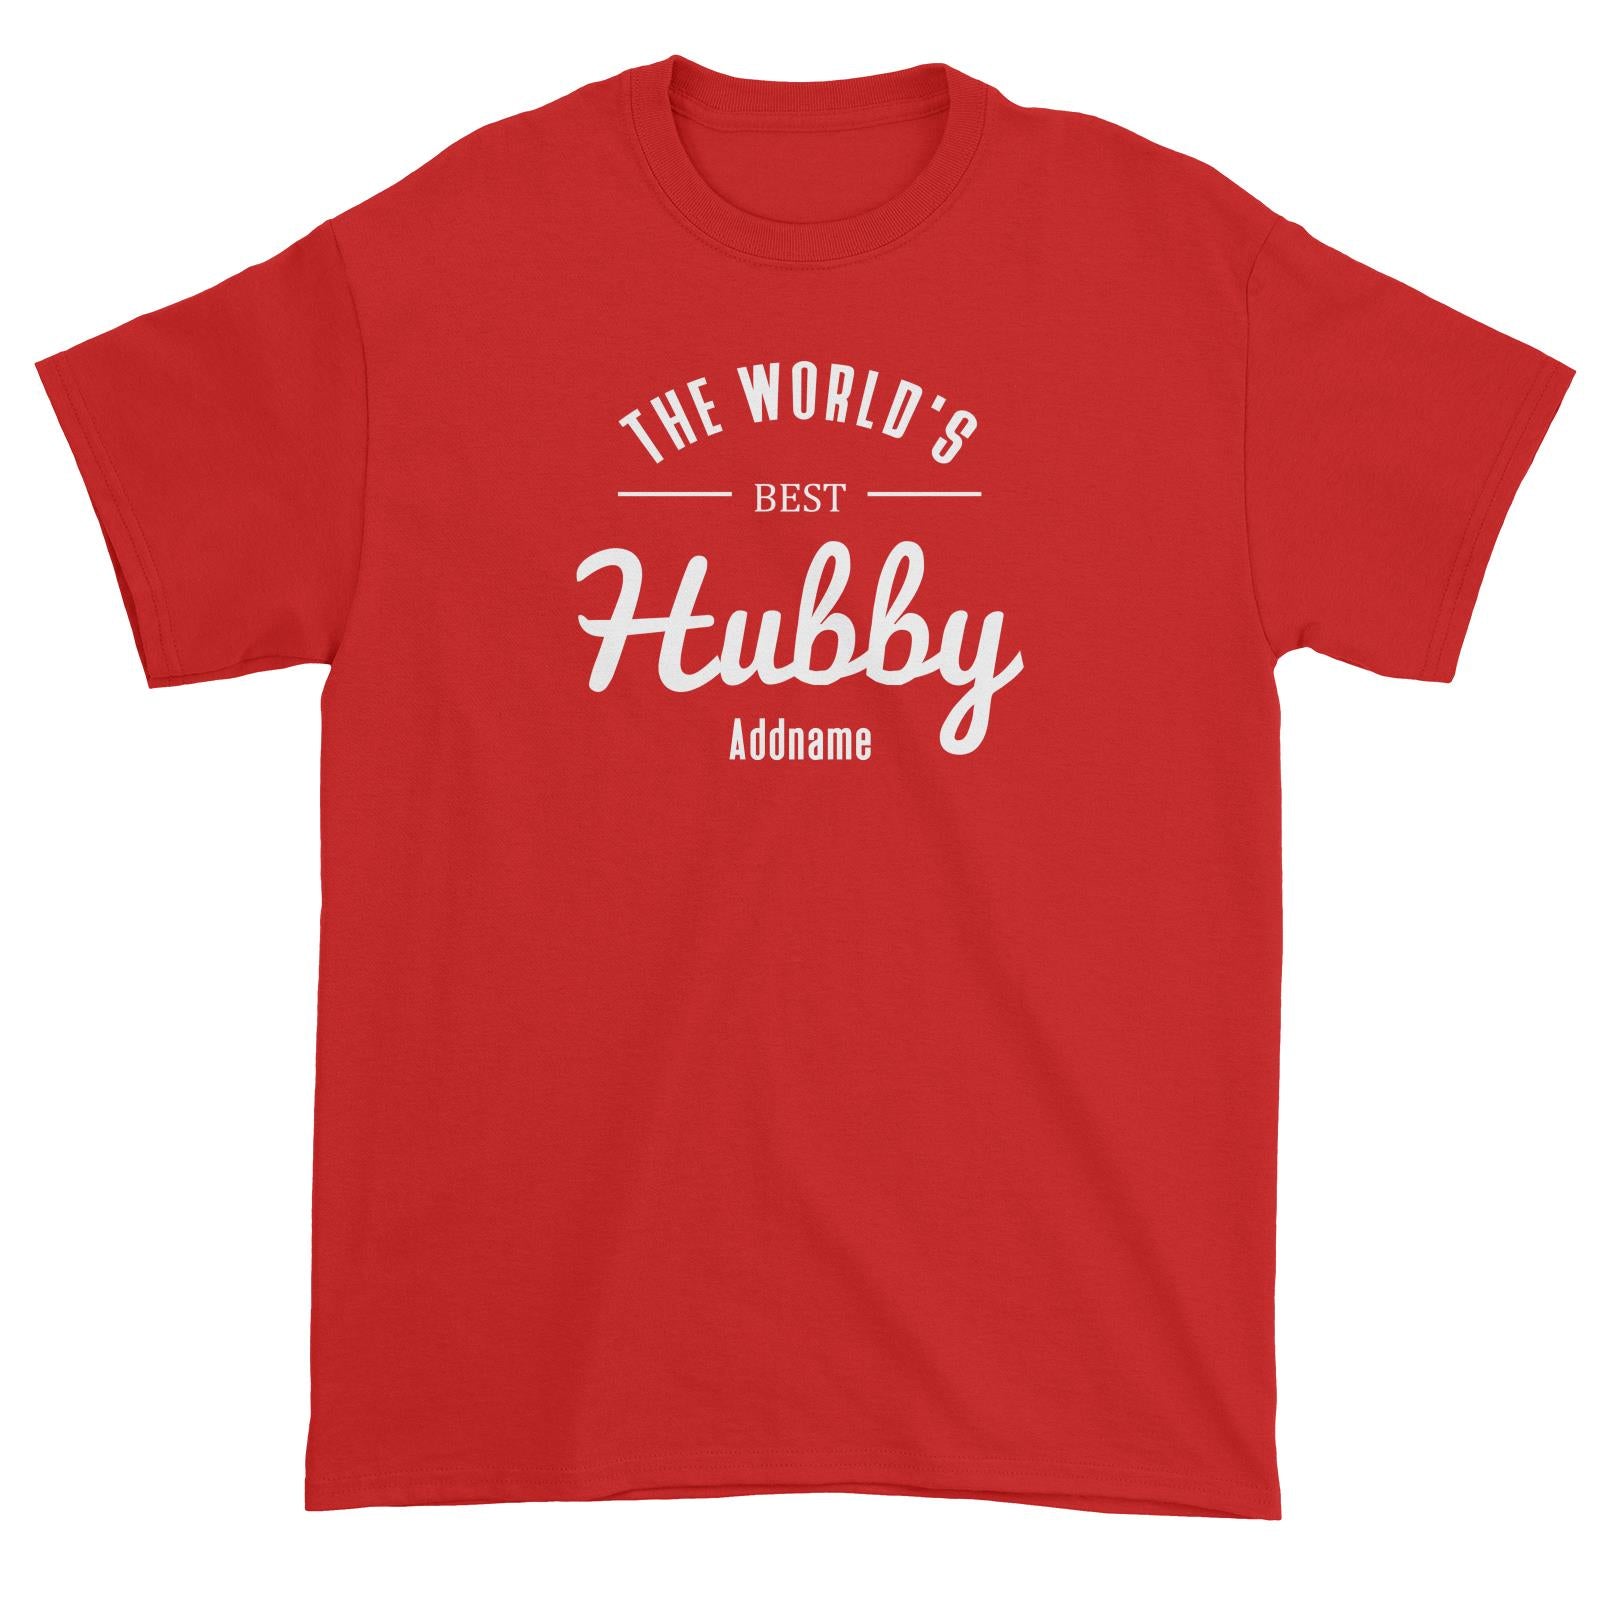 Husband and Wife The World's Best Hubby Addname Unisex T-Shirt